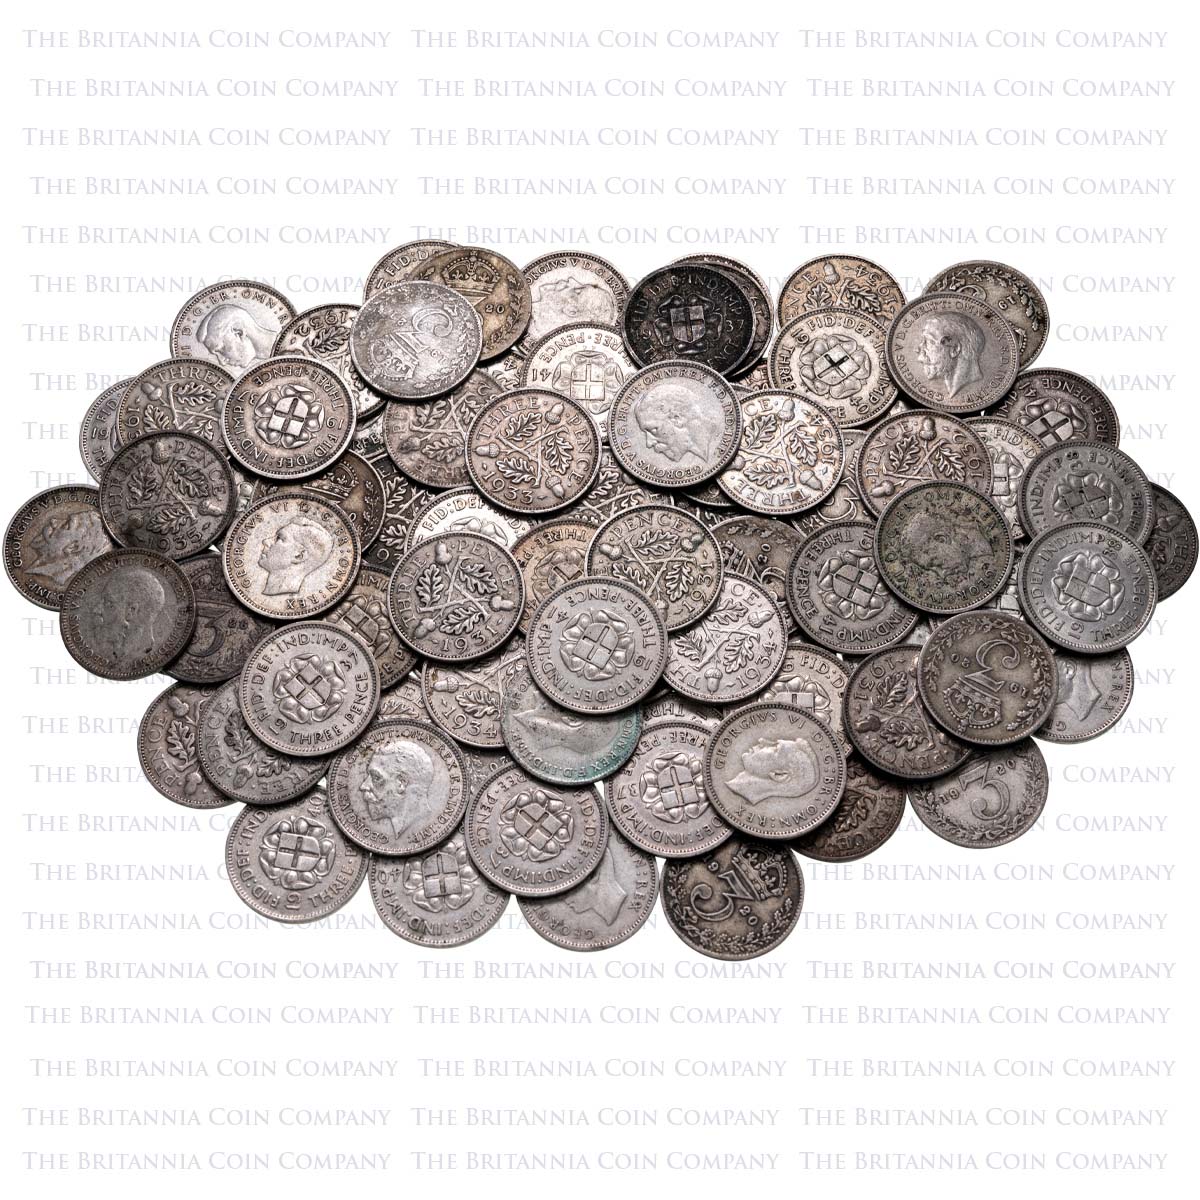 Bulk Mixed Date Unsorted 1920-1945 50% Silver Bullion Threepence Coins Kiloware (Best Value)